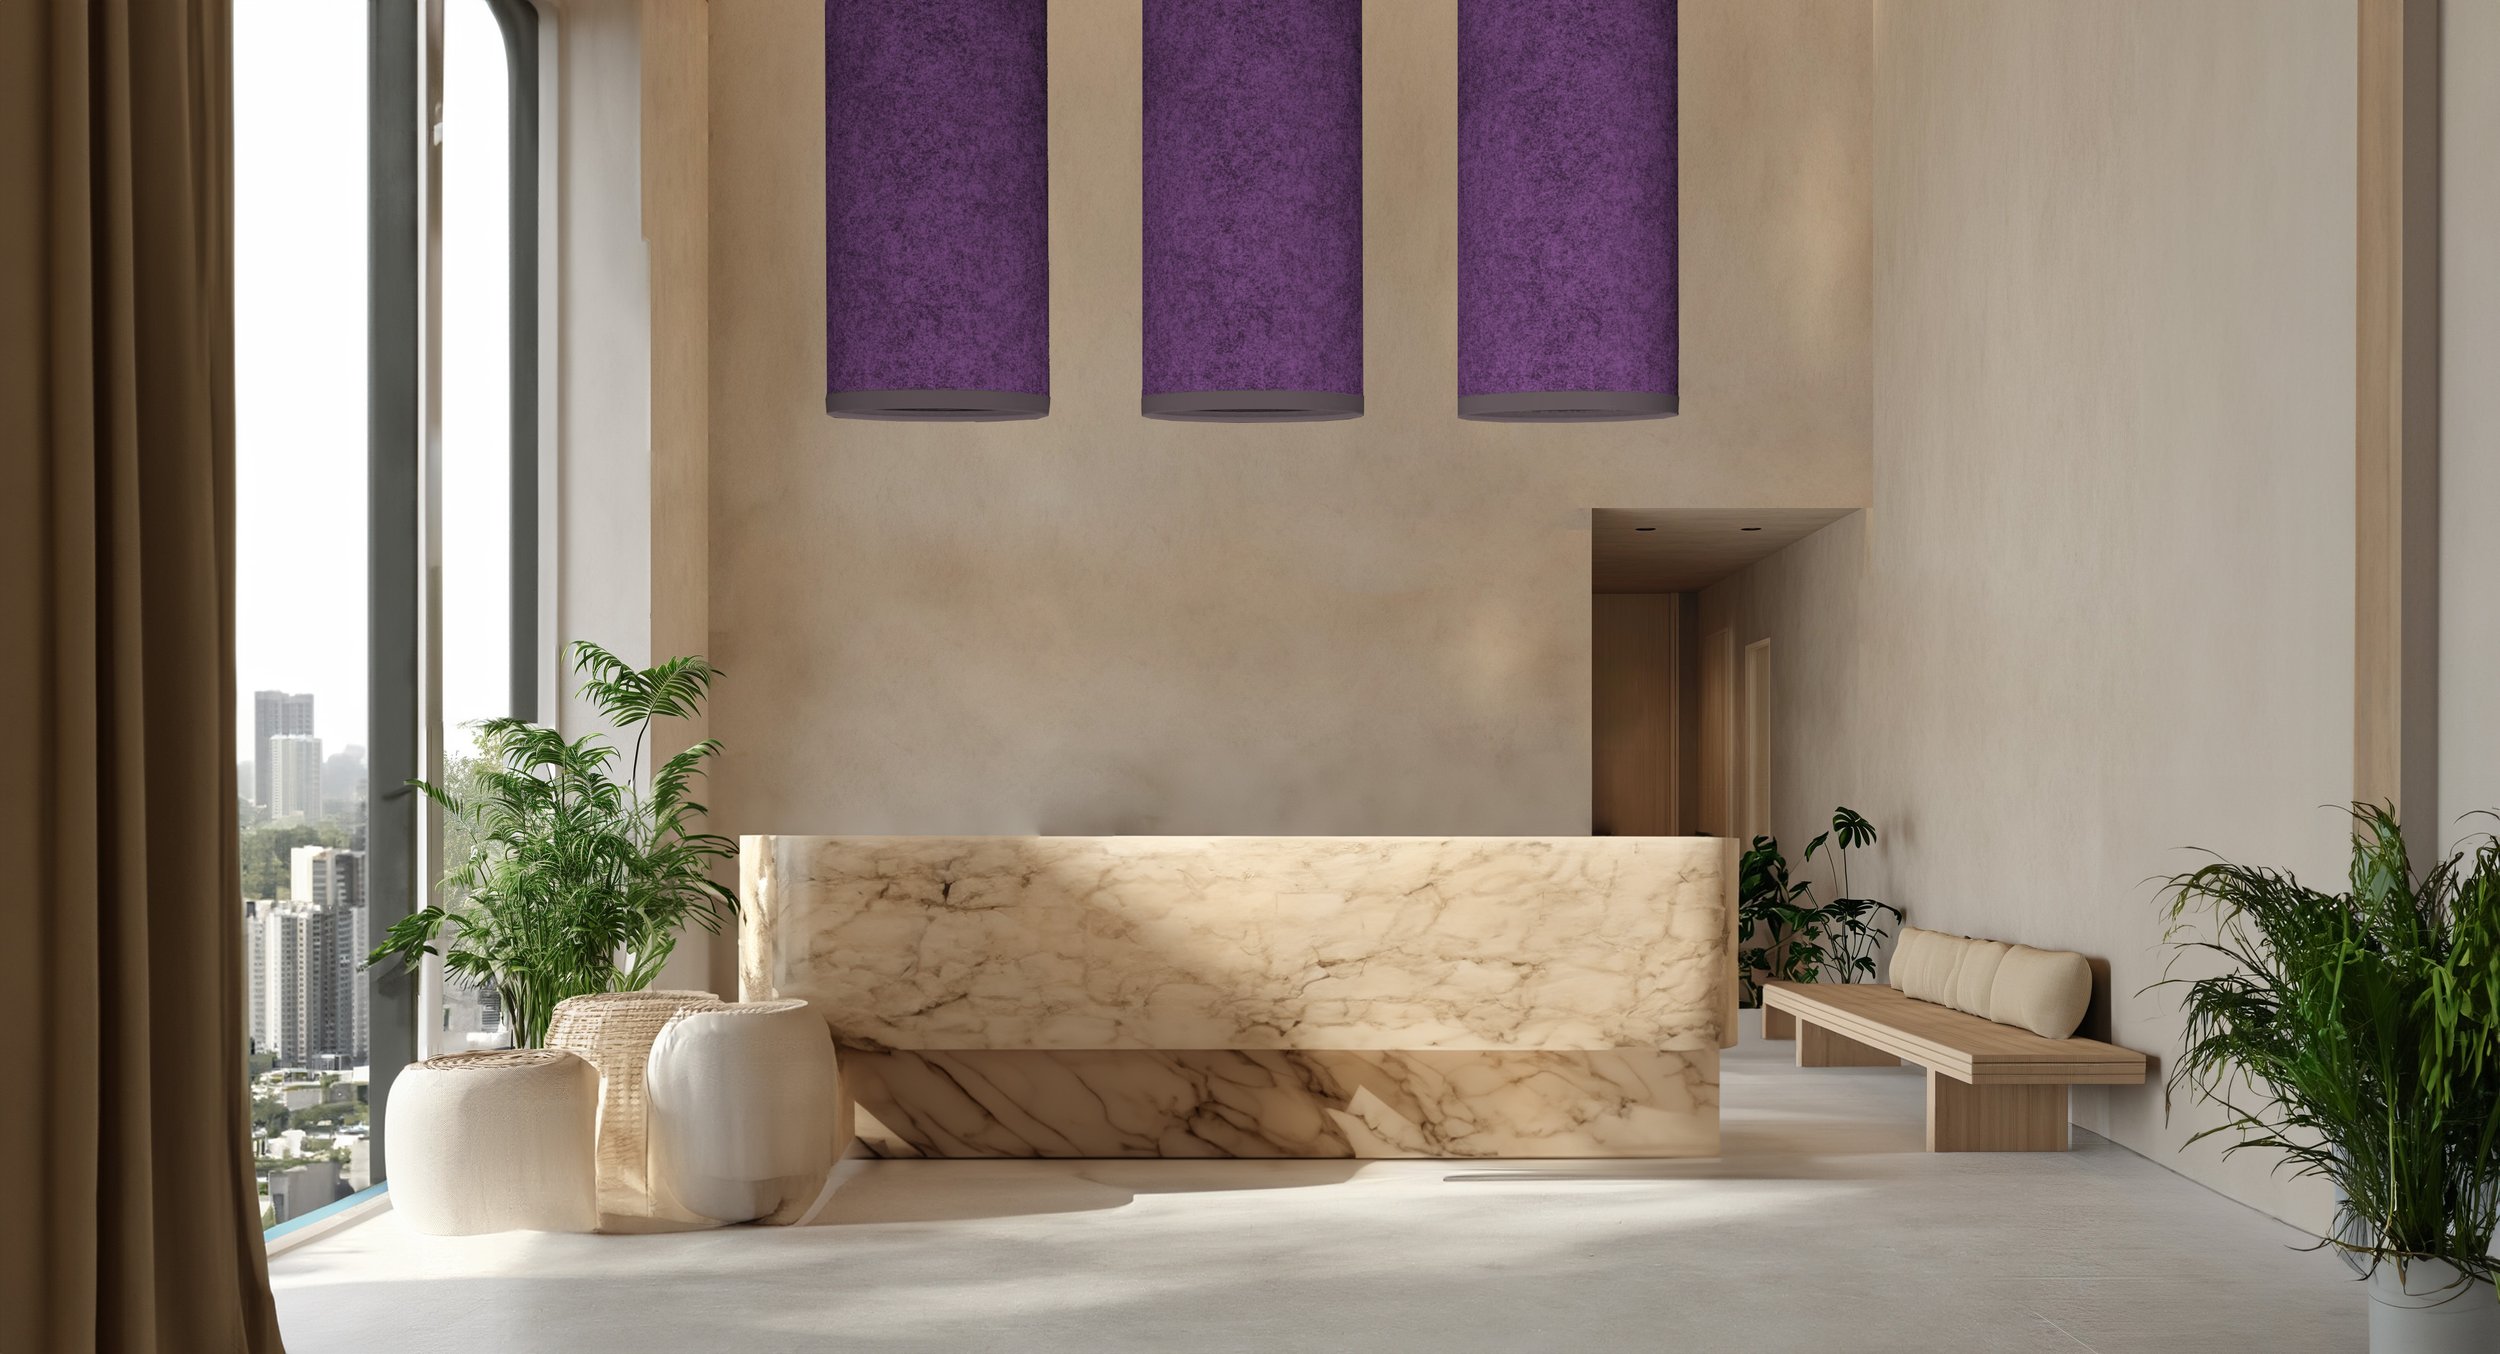  Tall Cylinder units in Wisteria felt color with Slate trim color 